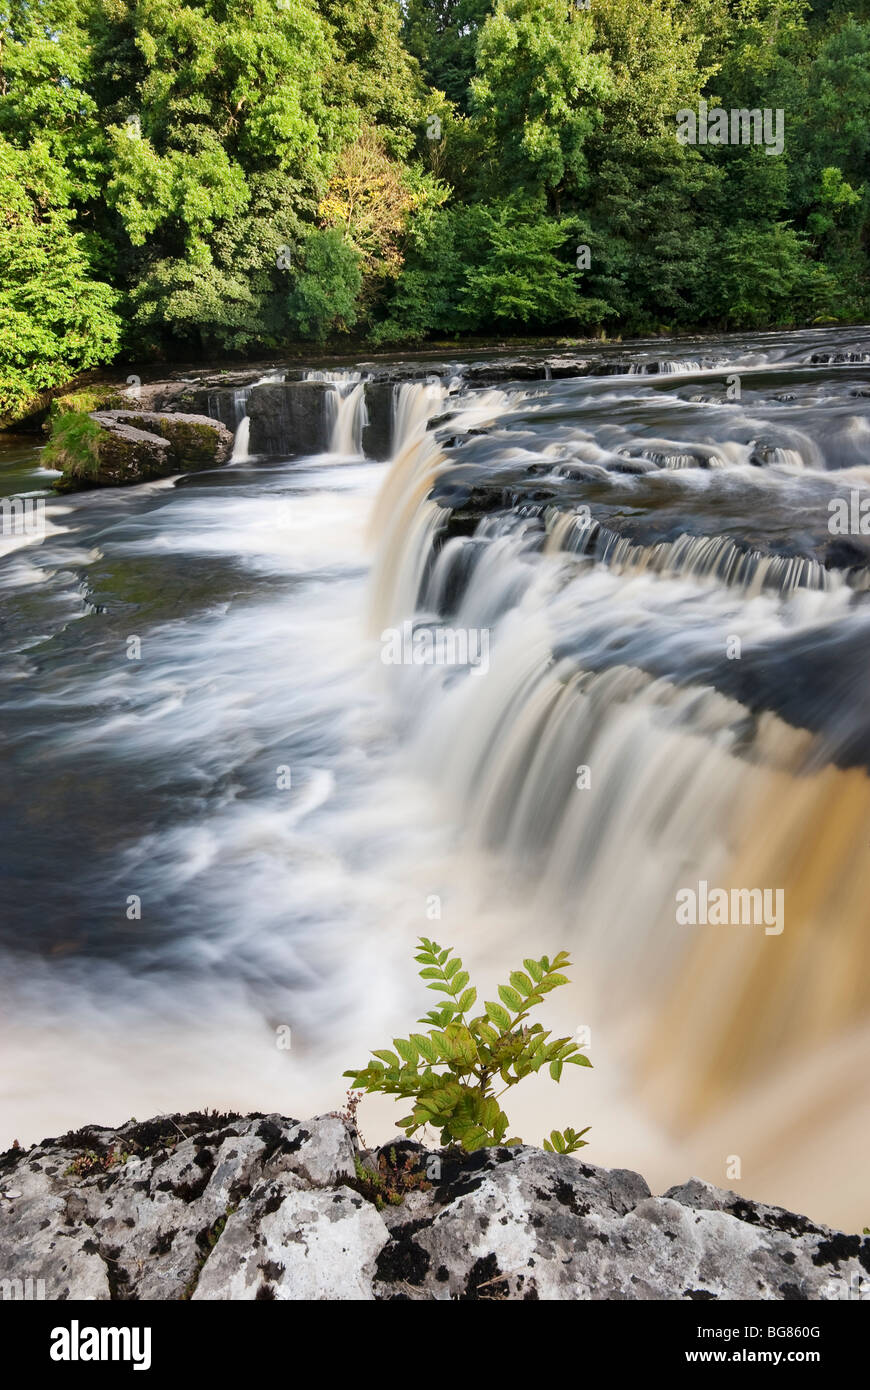 Plants growing in the rock crevasses at Aysgarth Falls on the River Ure in Wensleydale Yorkshire dales Stock Photo